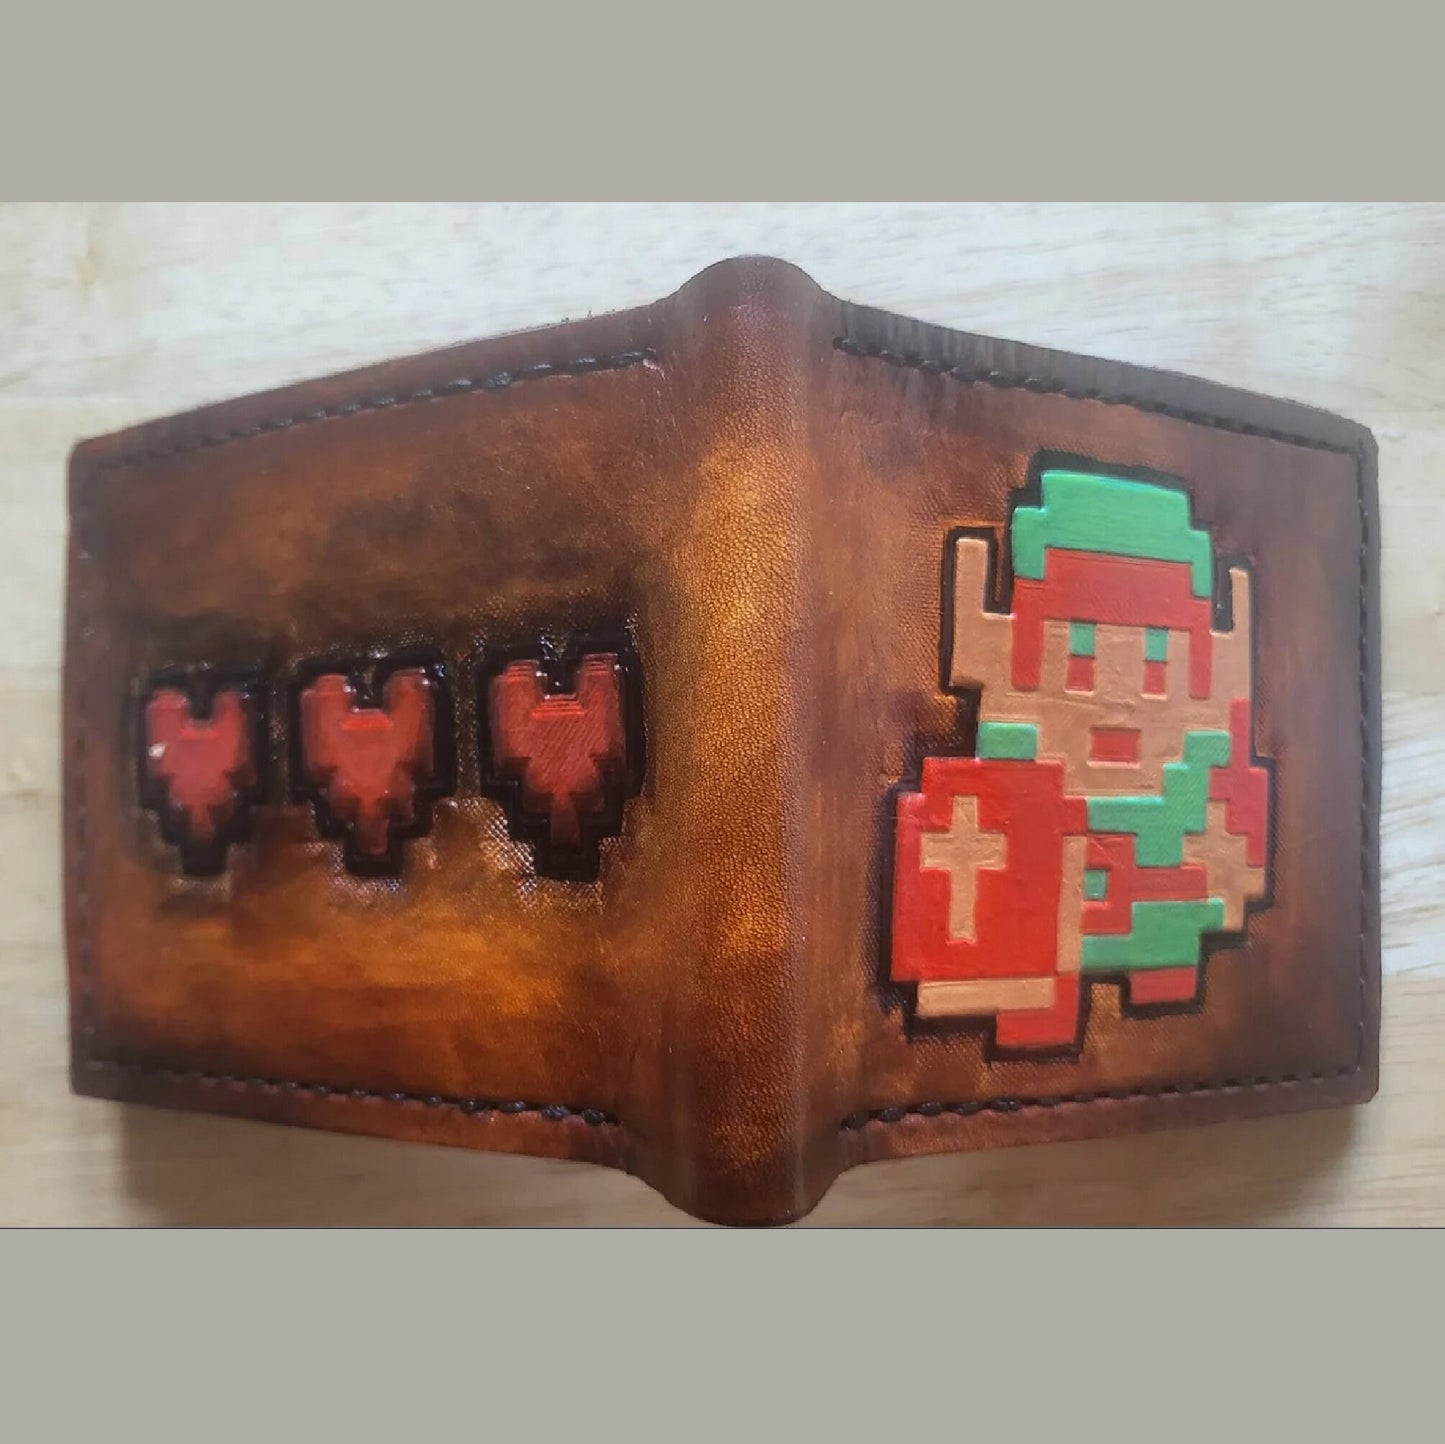 Pixel Link and Heart containers- color version - leather wallet - Leather Bifold Wallet - Handcrafted Legend of Zelda Wallet - Link Wallet